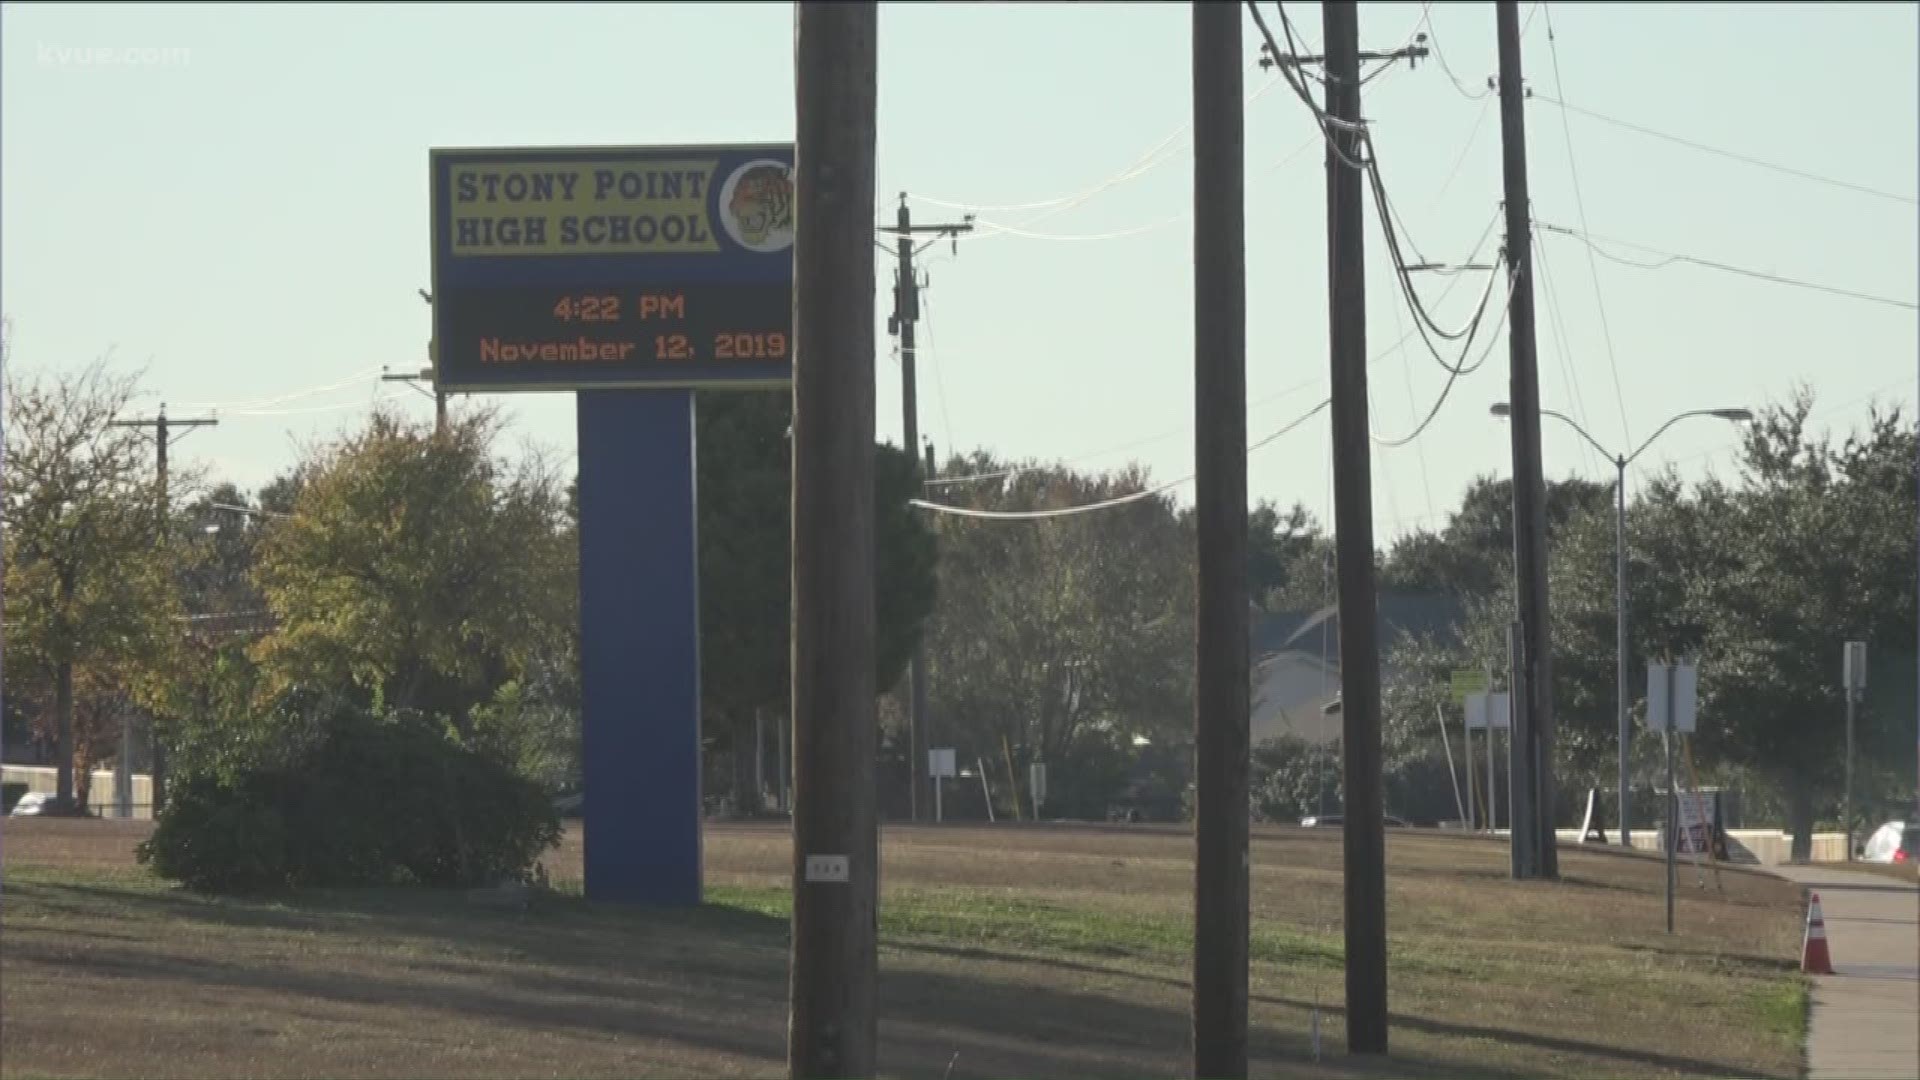 A Stony Point High School student is facing charges after an incident involving a knife.